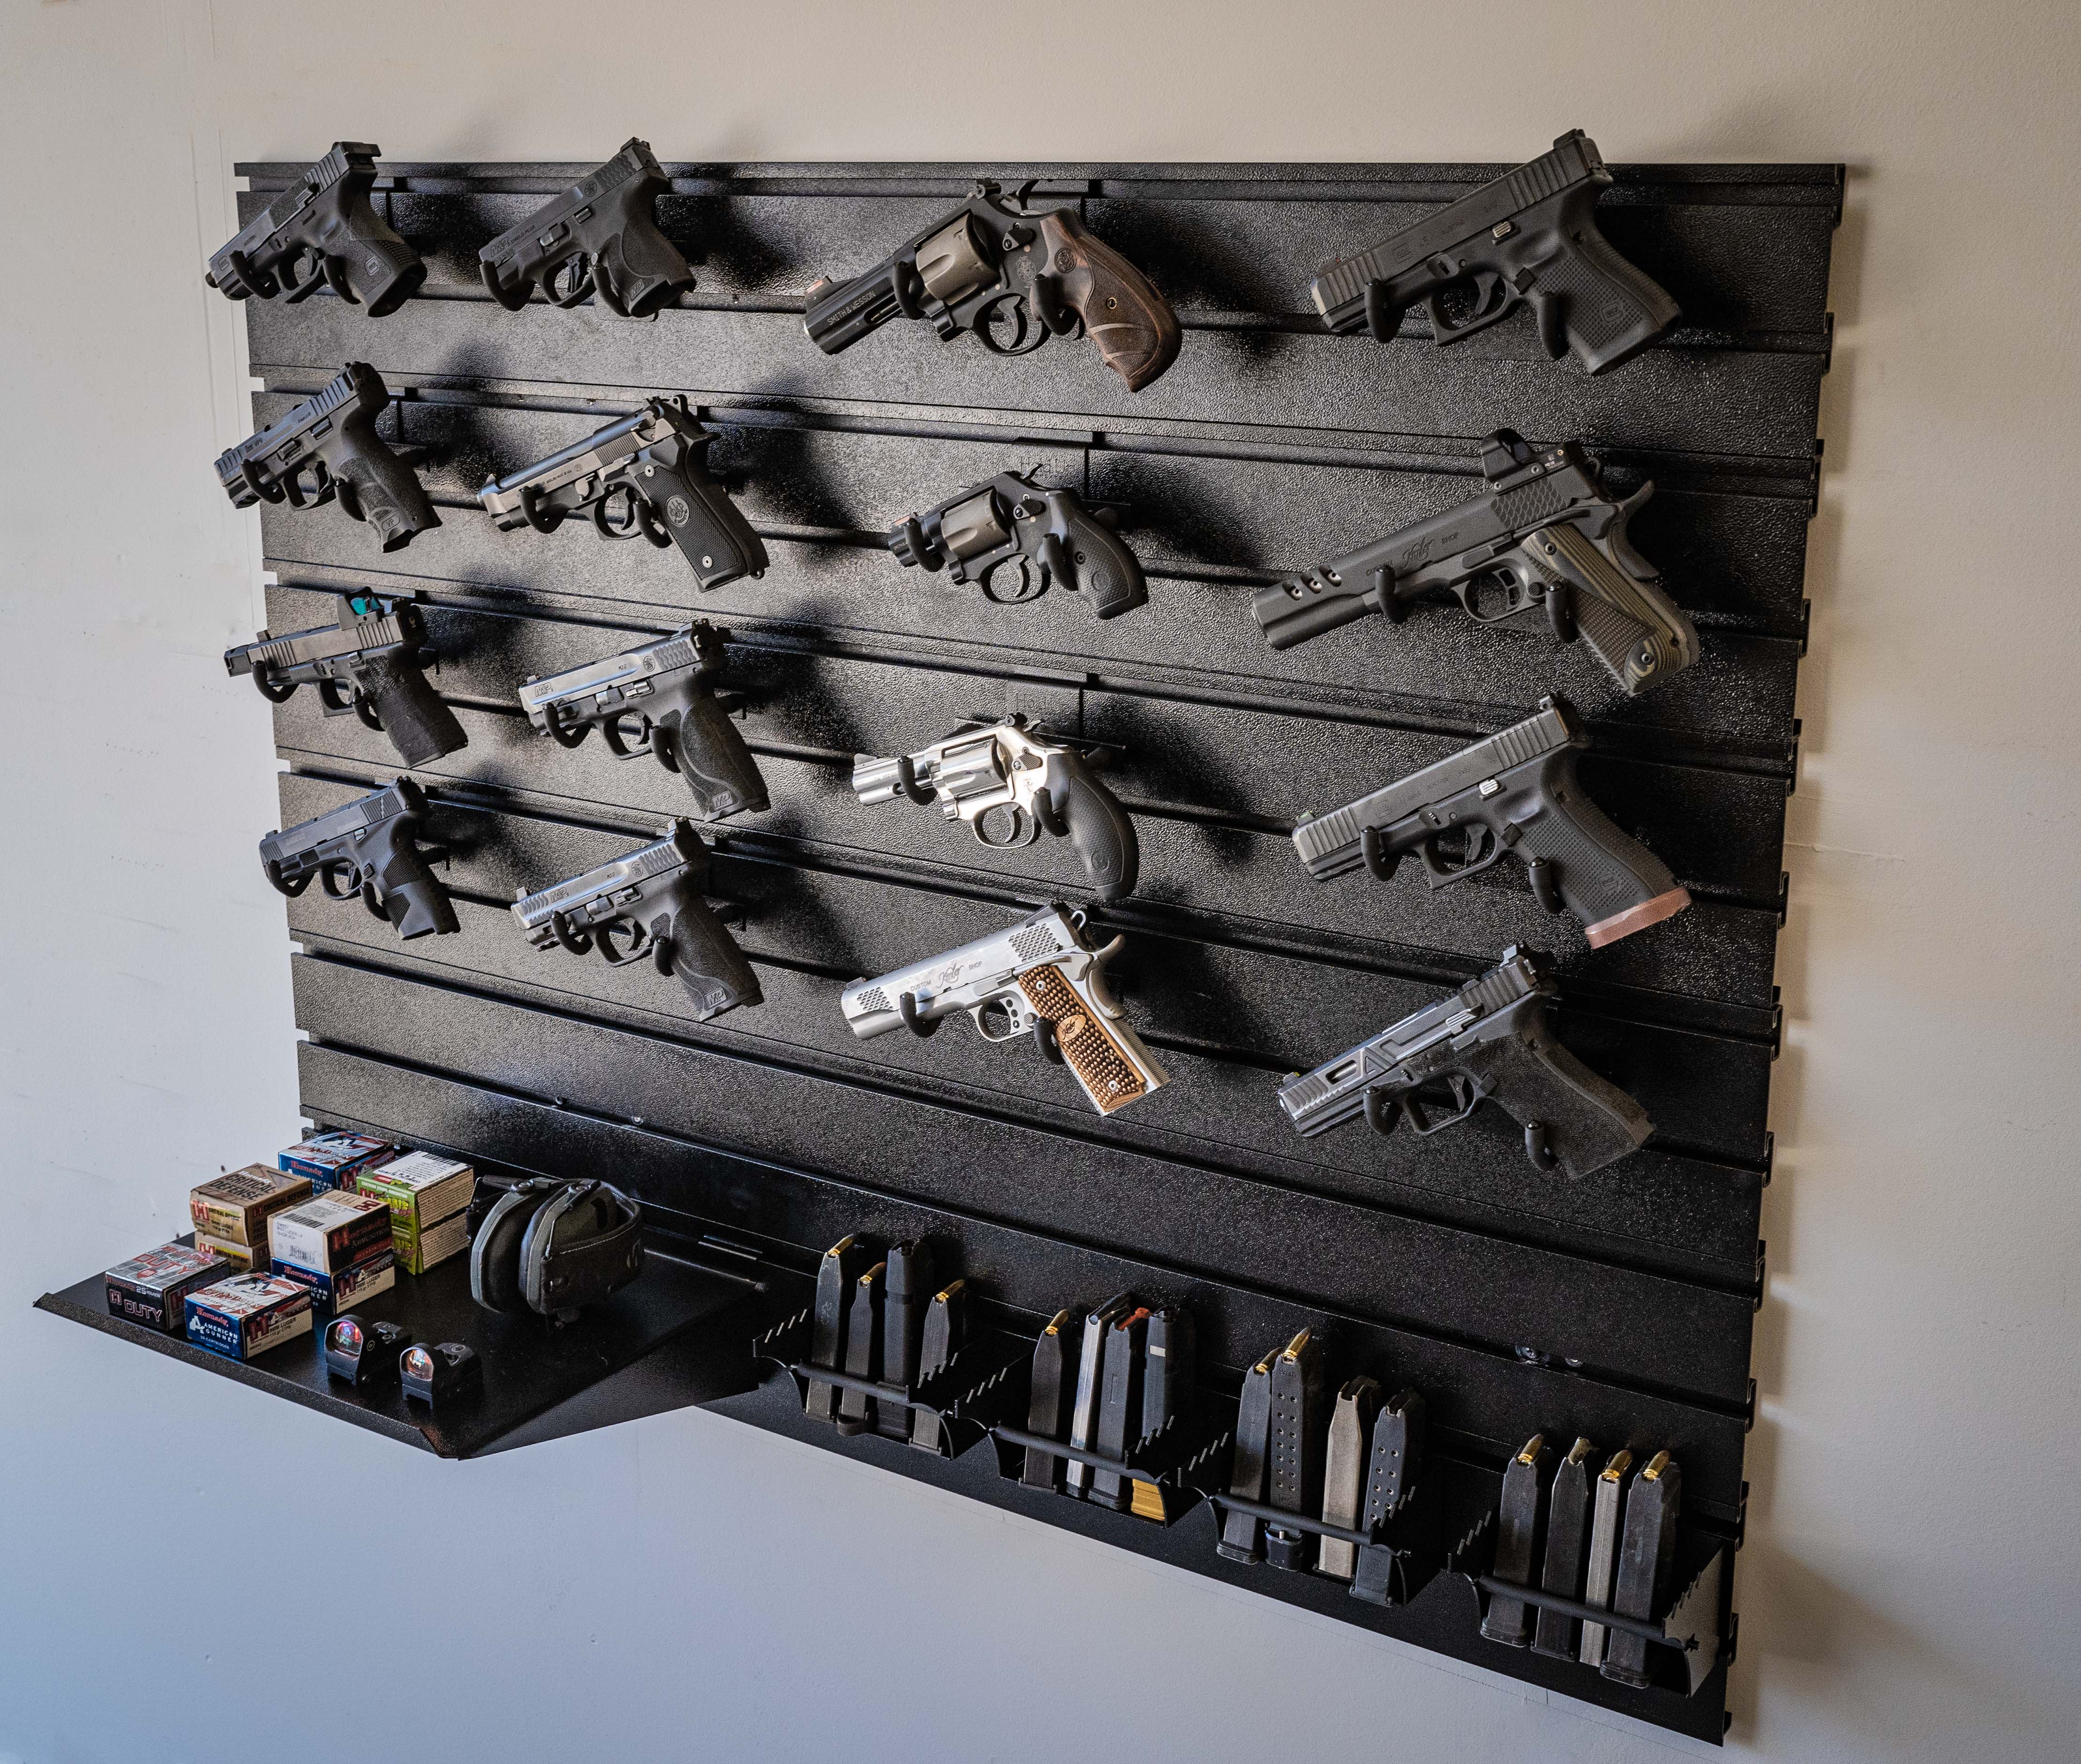 Police Gear Racks & Storage Ideas for Organizing Essentials - Hold Up  Displays